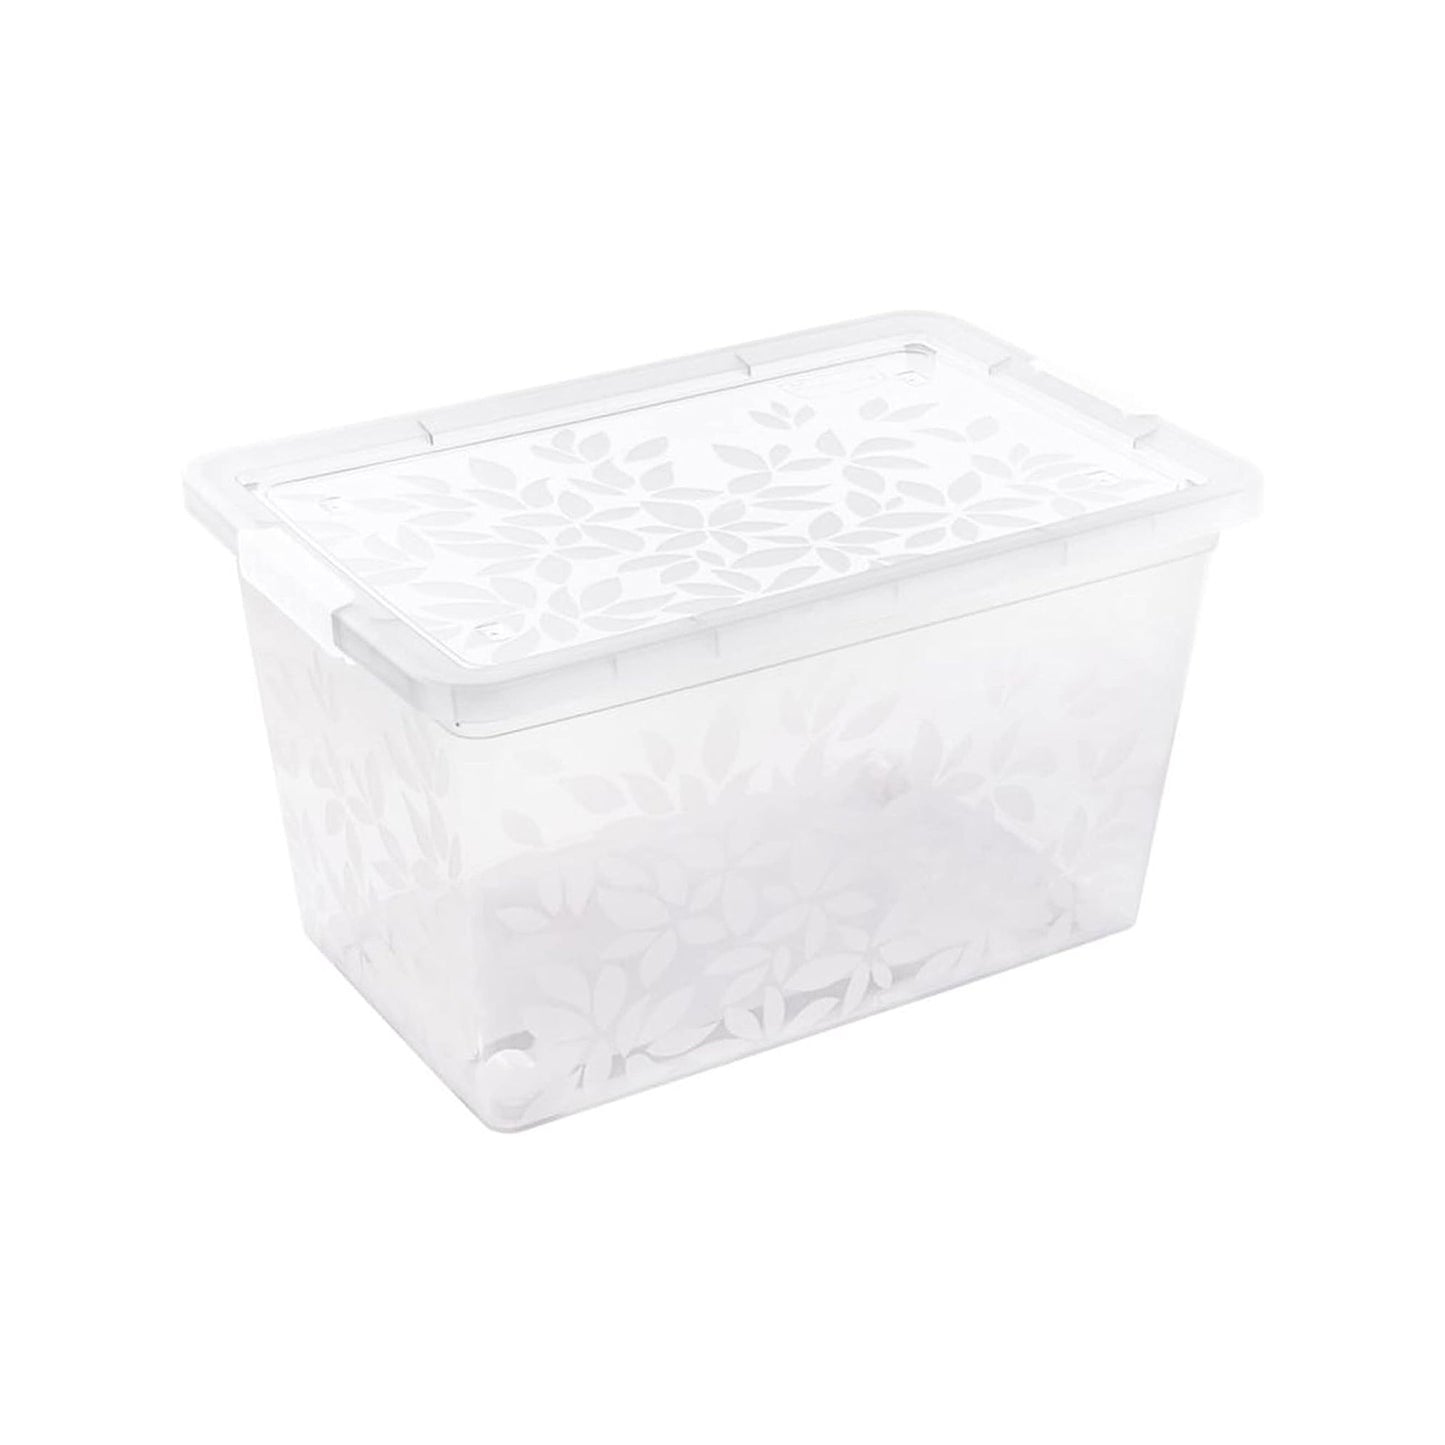 Elegant Jasmine Leaves Strong Stackable Plastic Storage Boxes Complete With Clip Locked Lids